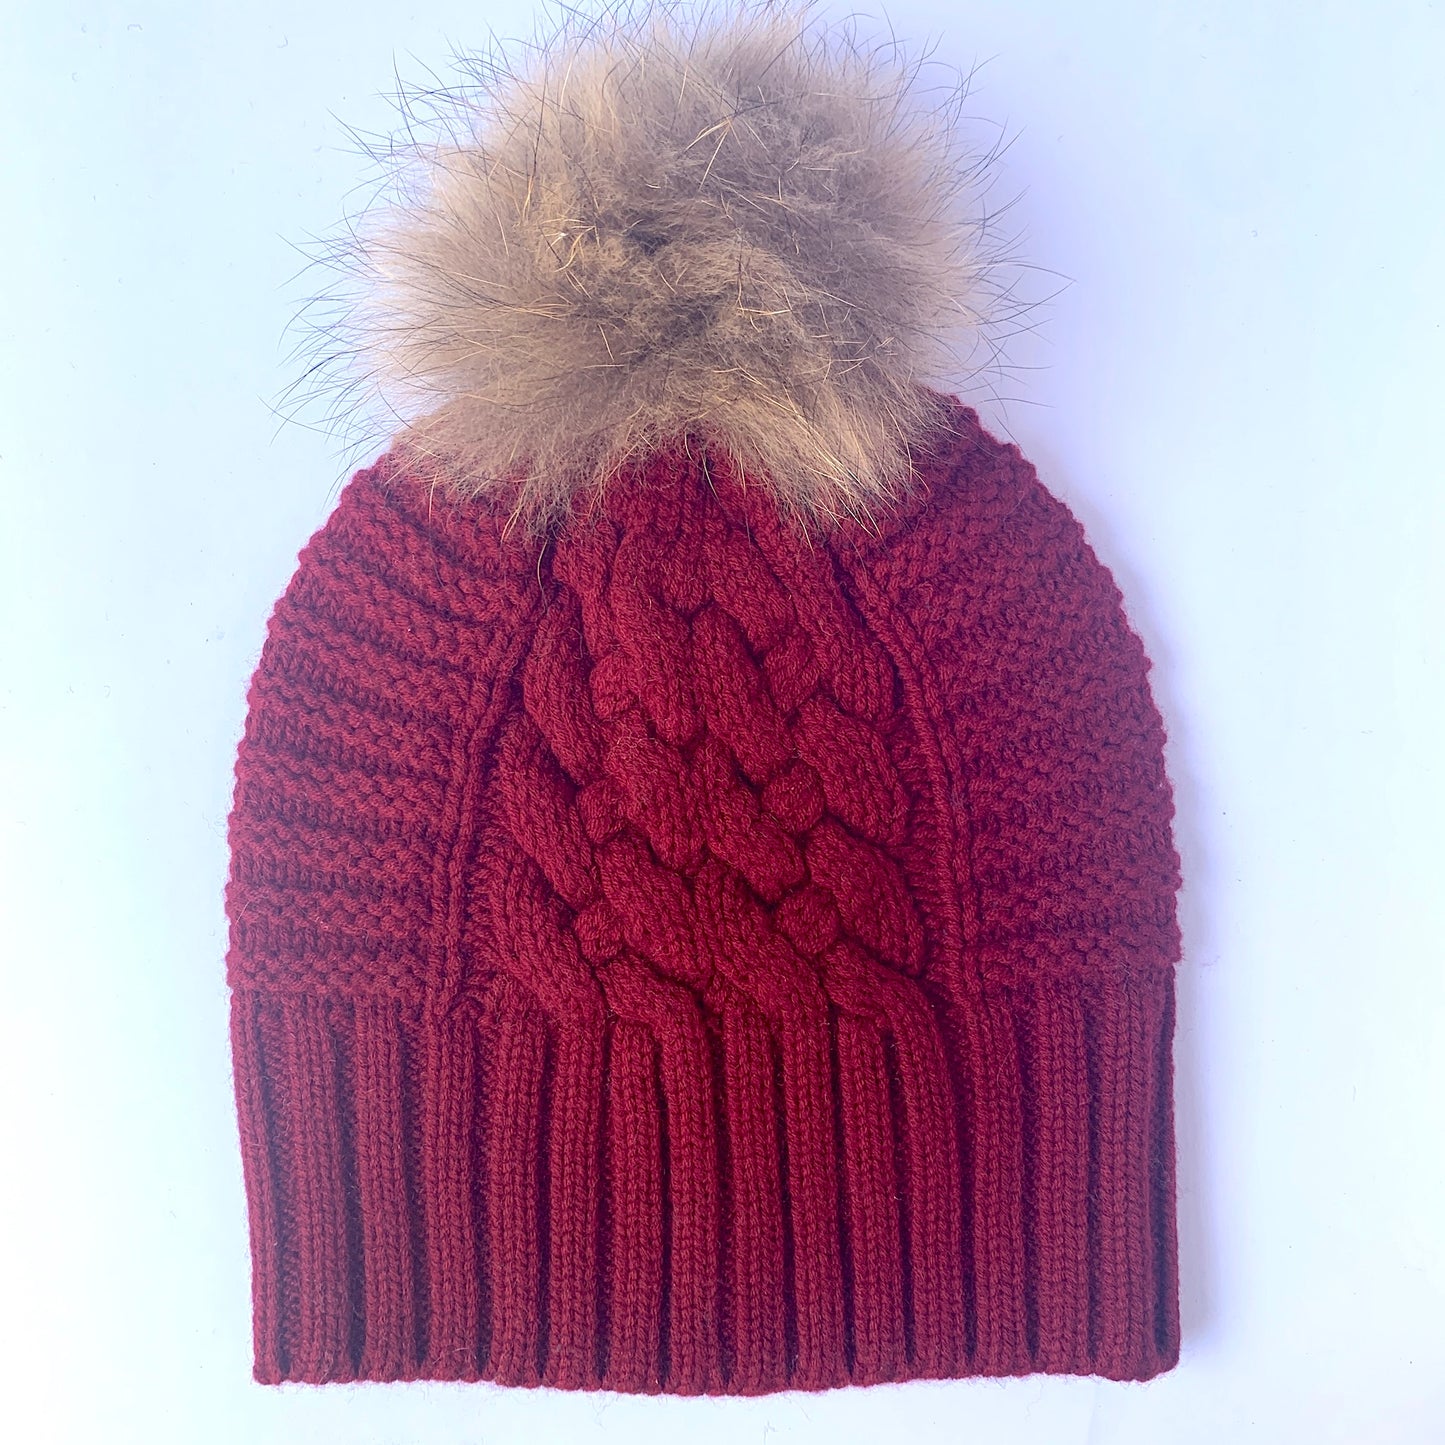 UP for ANYTHING 100% Pure Merino Wool Jumbo Cable & Fancy Rib Beanie with detachable Raccoon Fur Pom Pom, Classic Car Red